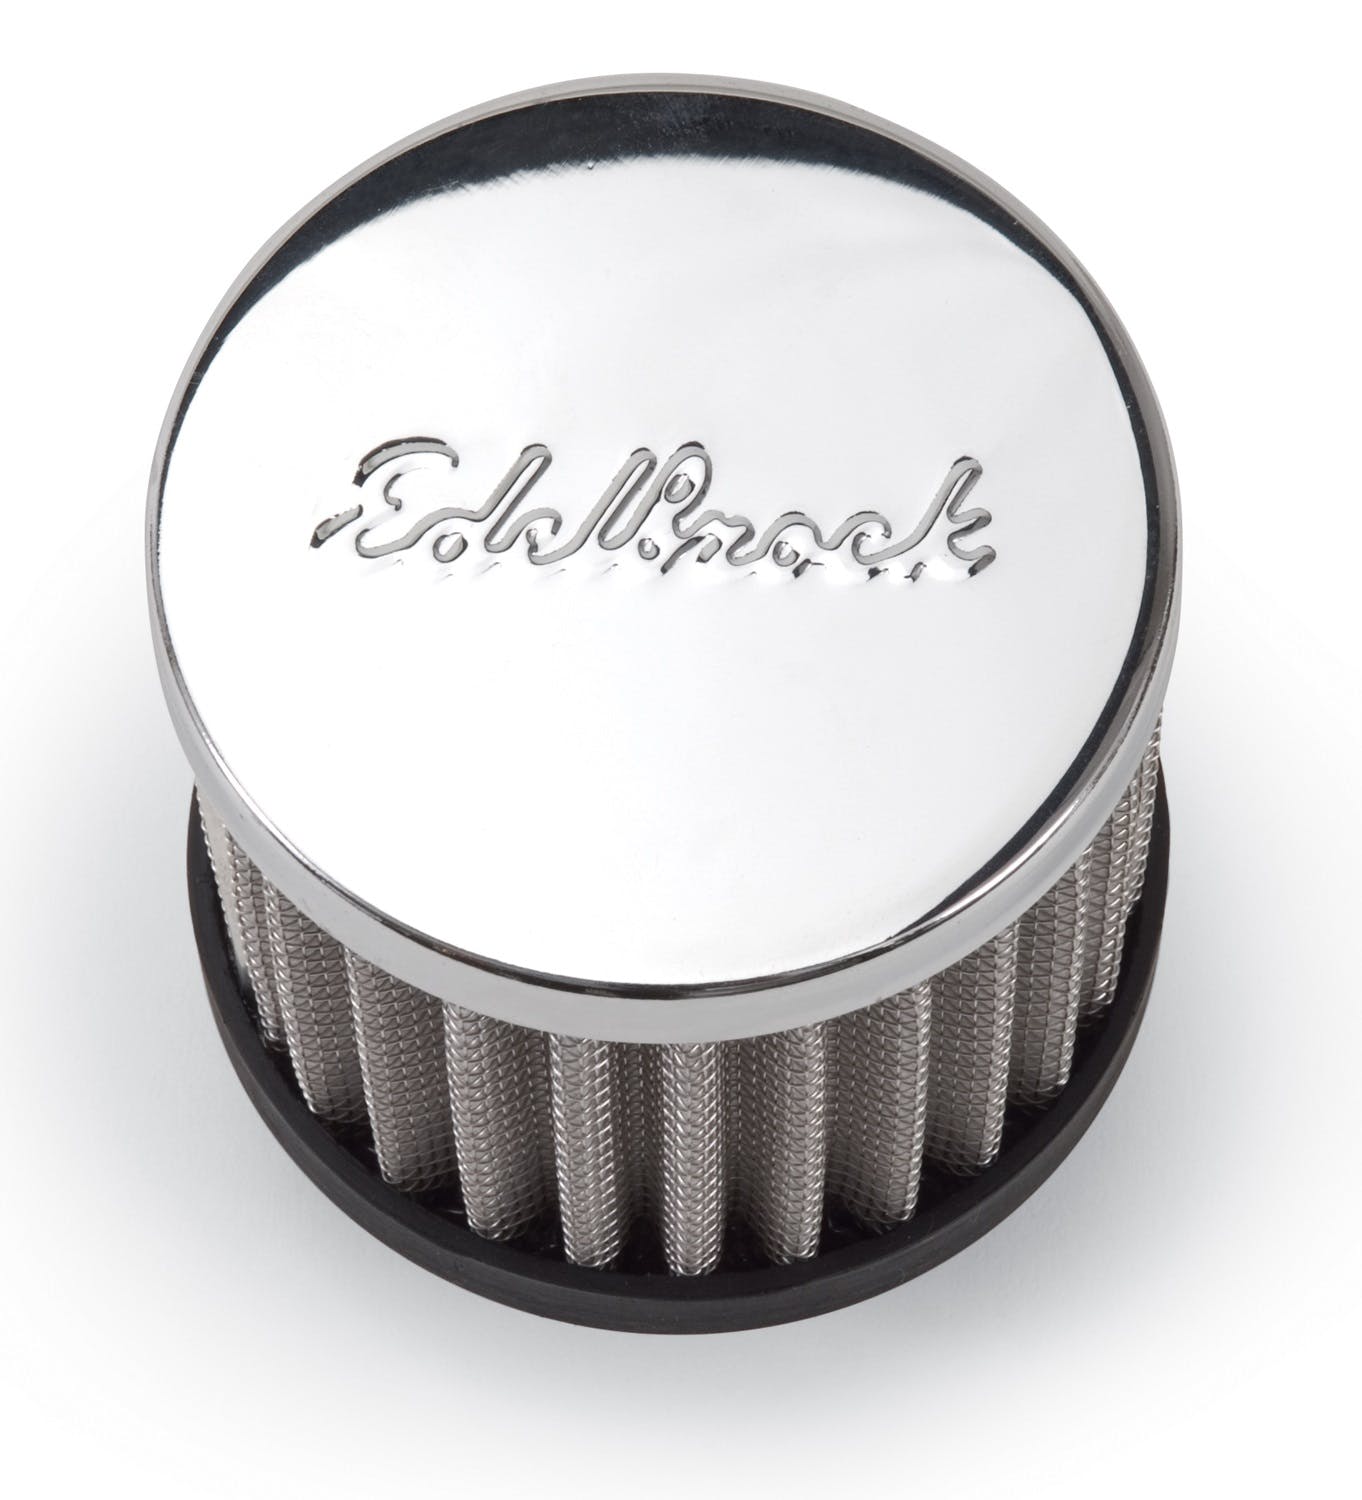 Edelbrock 4420 Circle Track Style Open Cotton Gauze Element Round Push-in Breather